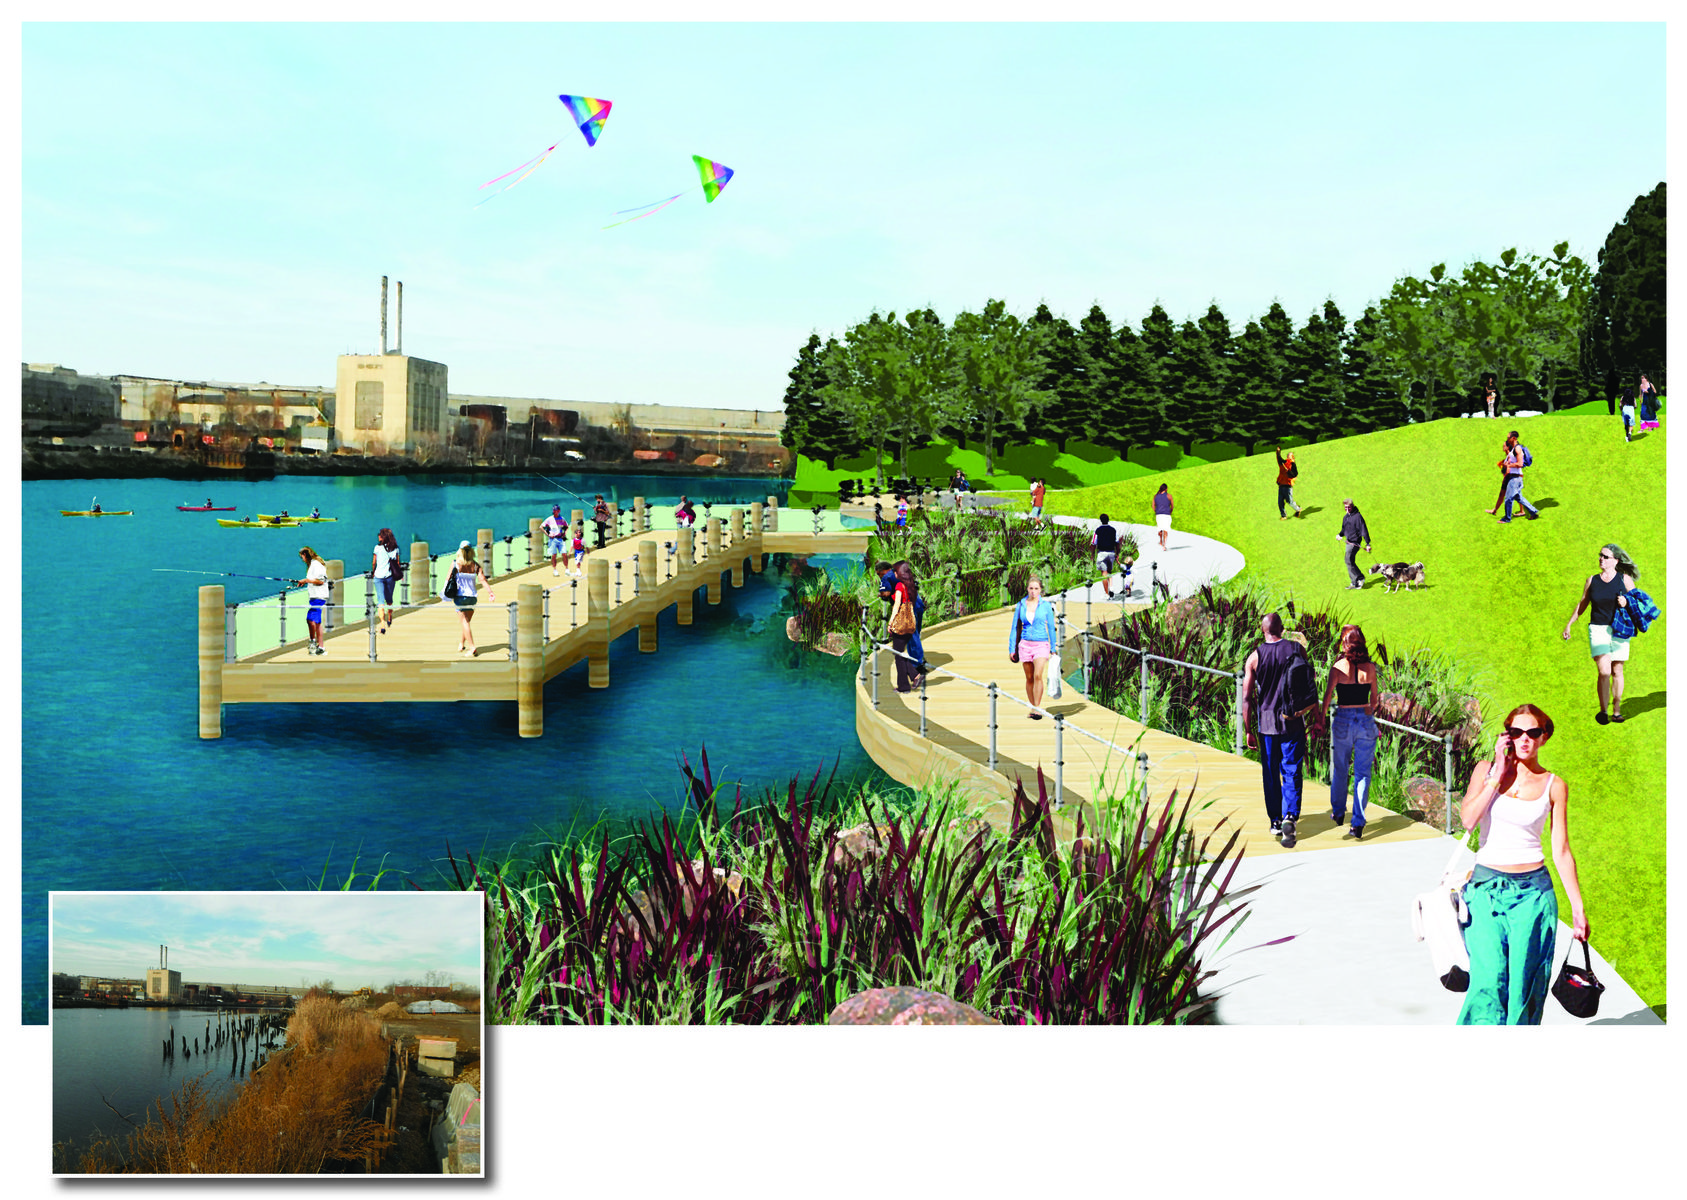 A waterfront promenade and fishing pier constructed from existing piles provide new public waterfront access. Boardwalks weave through native riparian plantings that provide habitat and cleanse stormwater runoff.